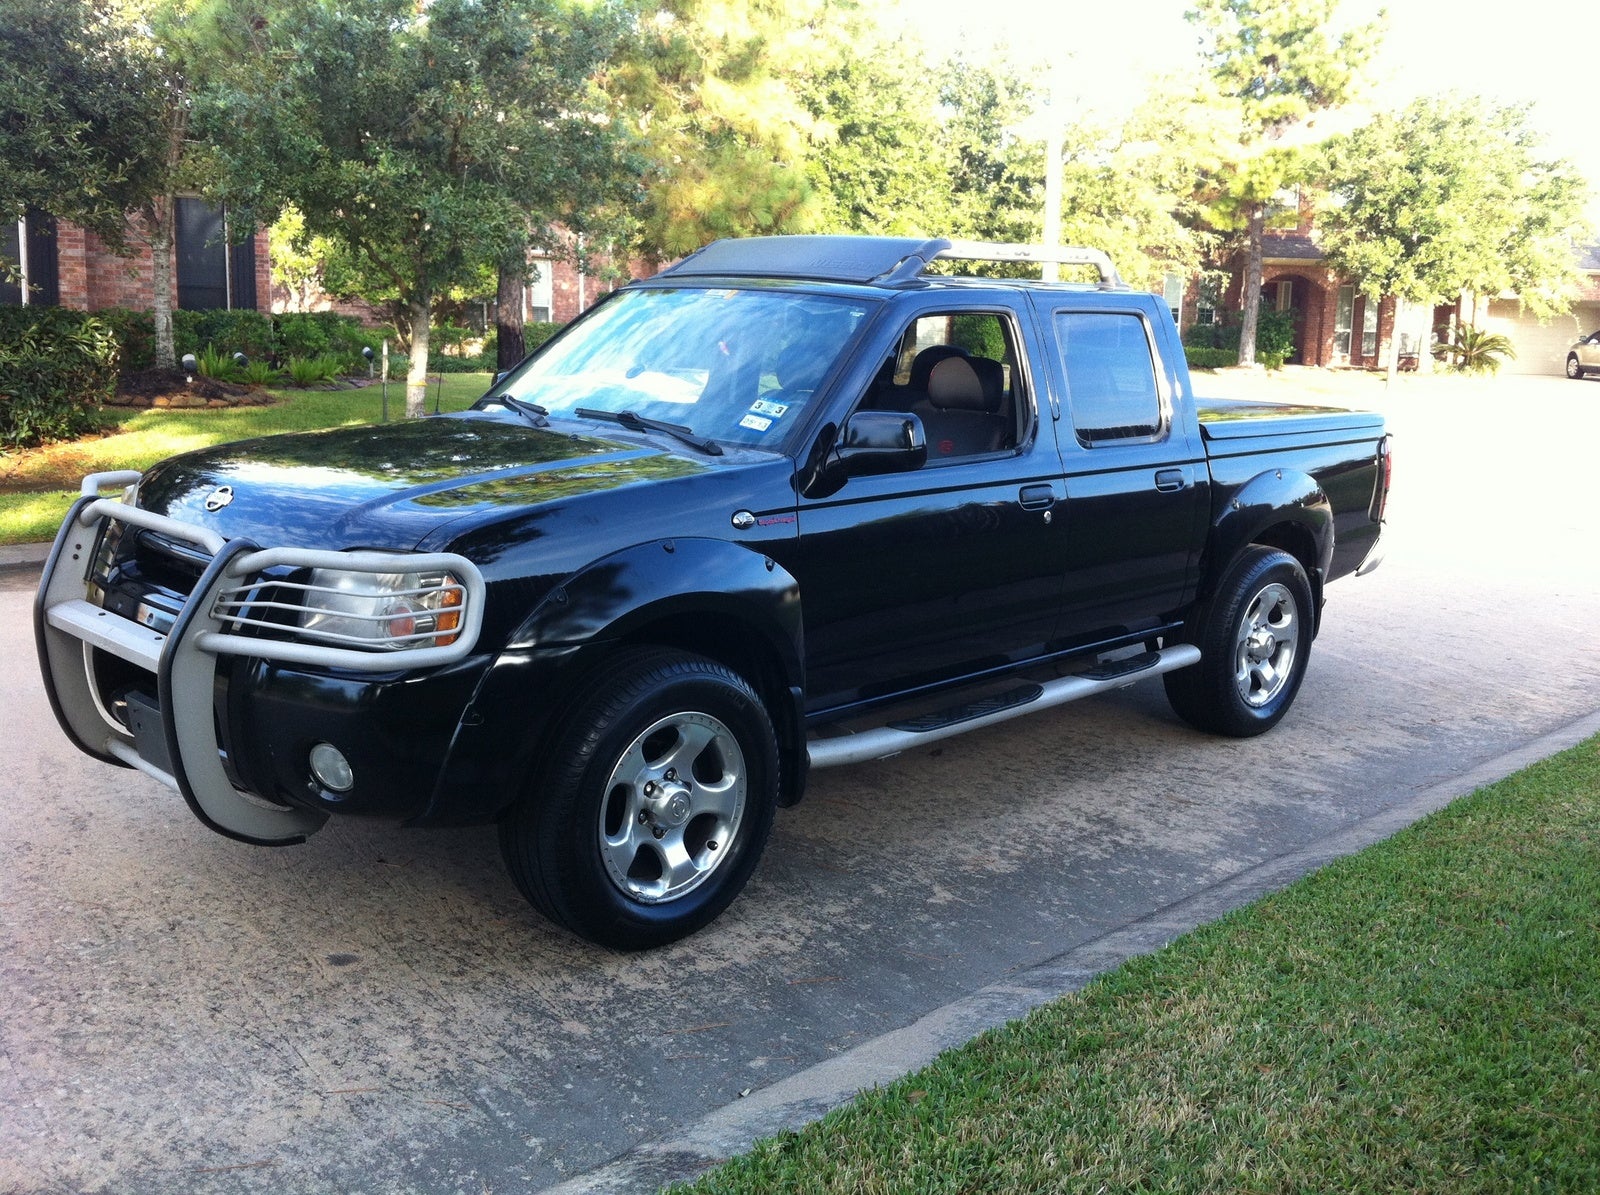 2001 Nissan frontier supercharged specs #1